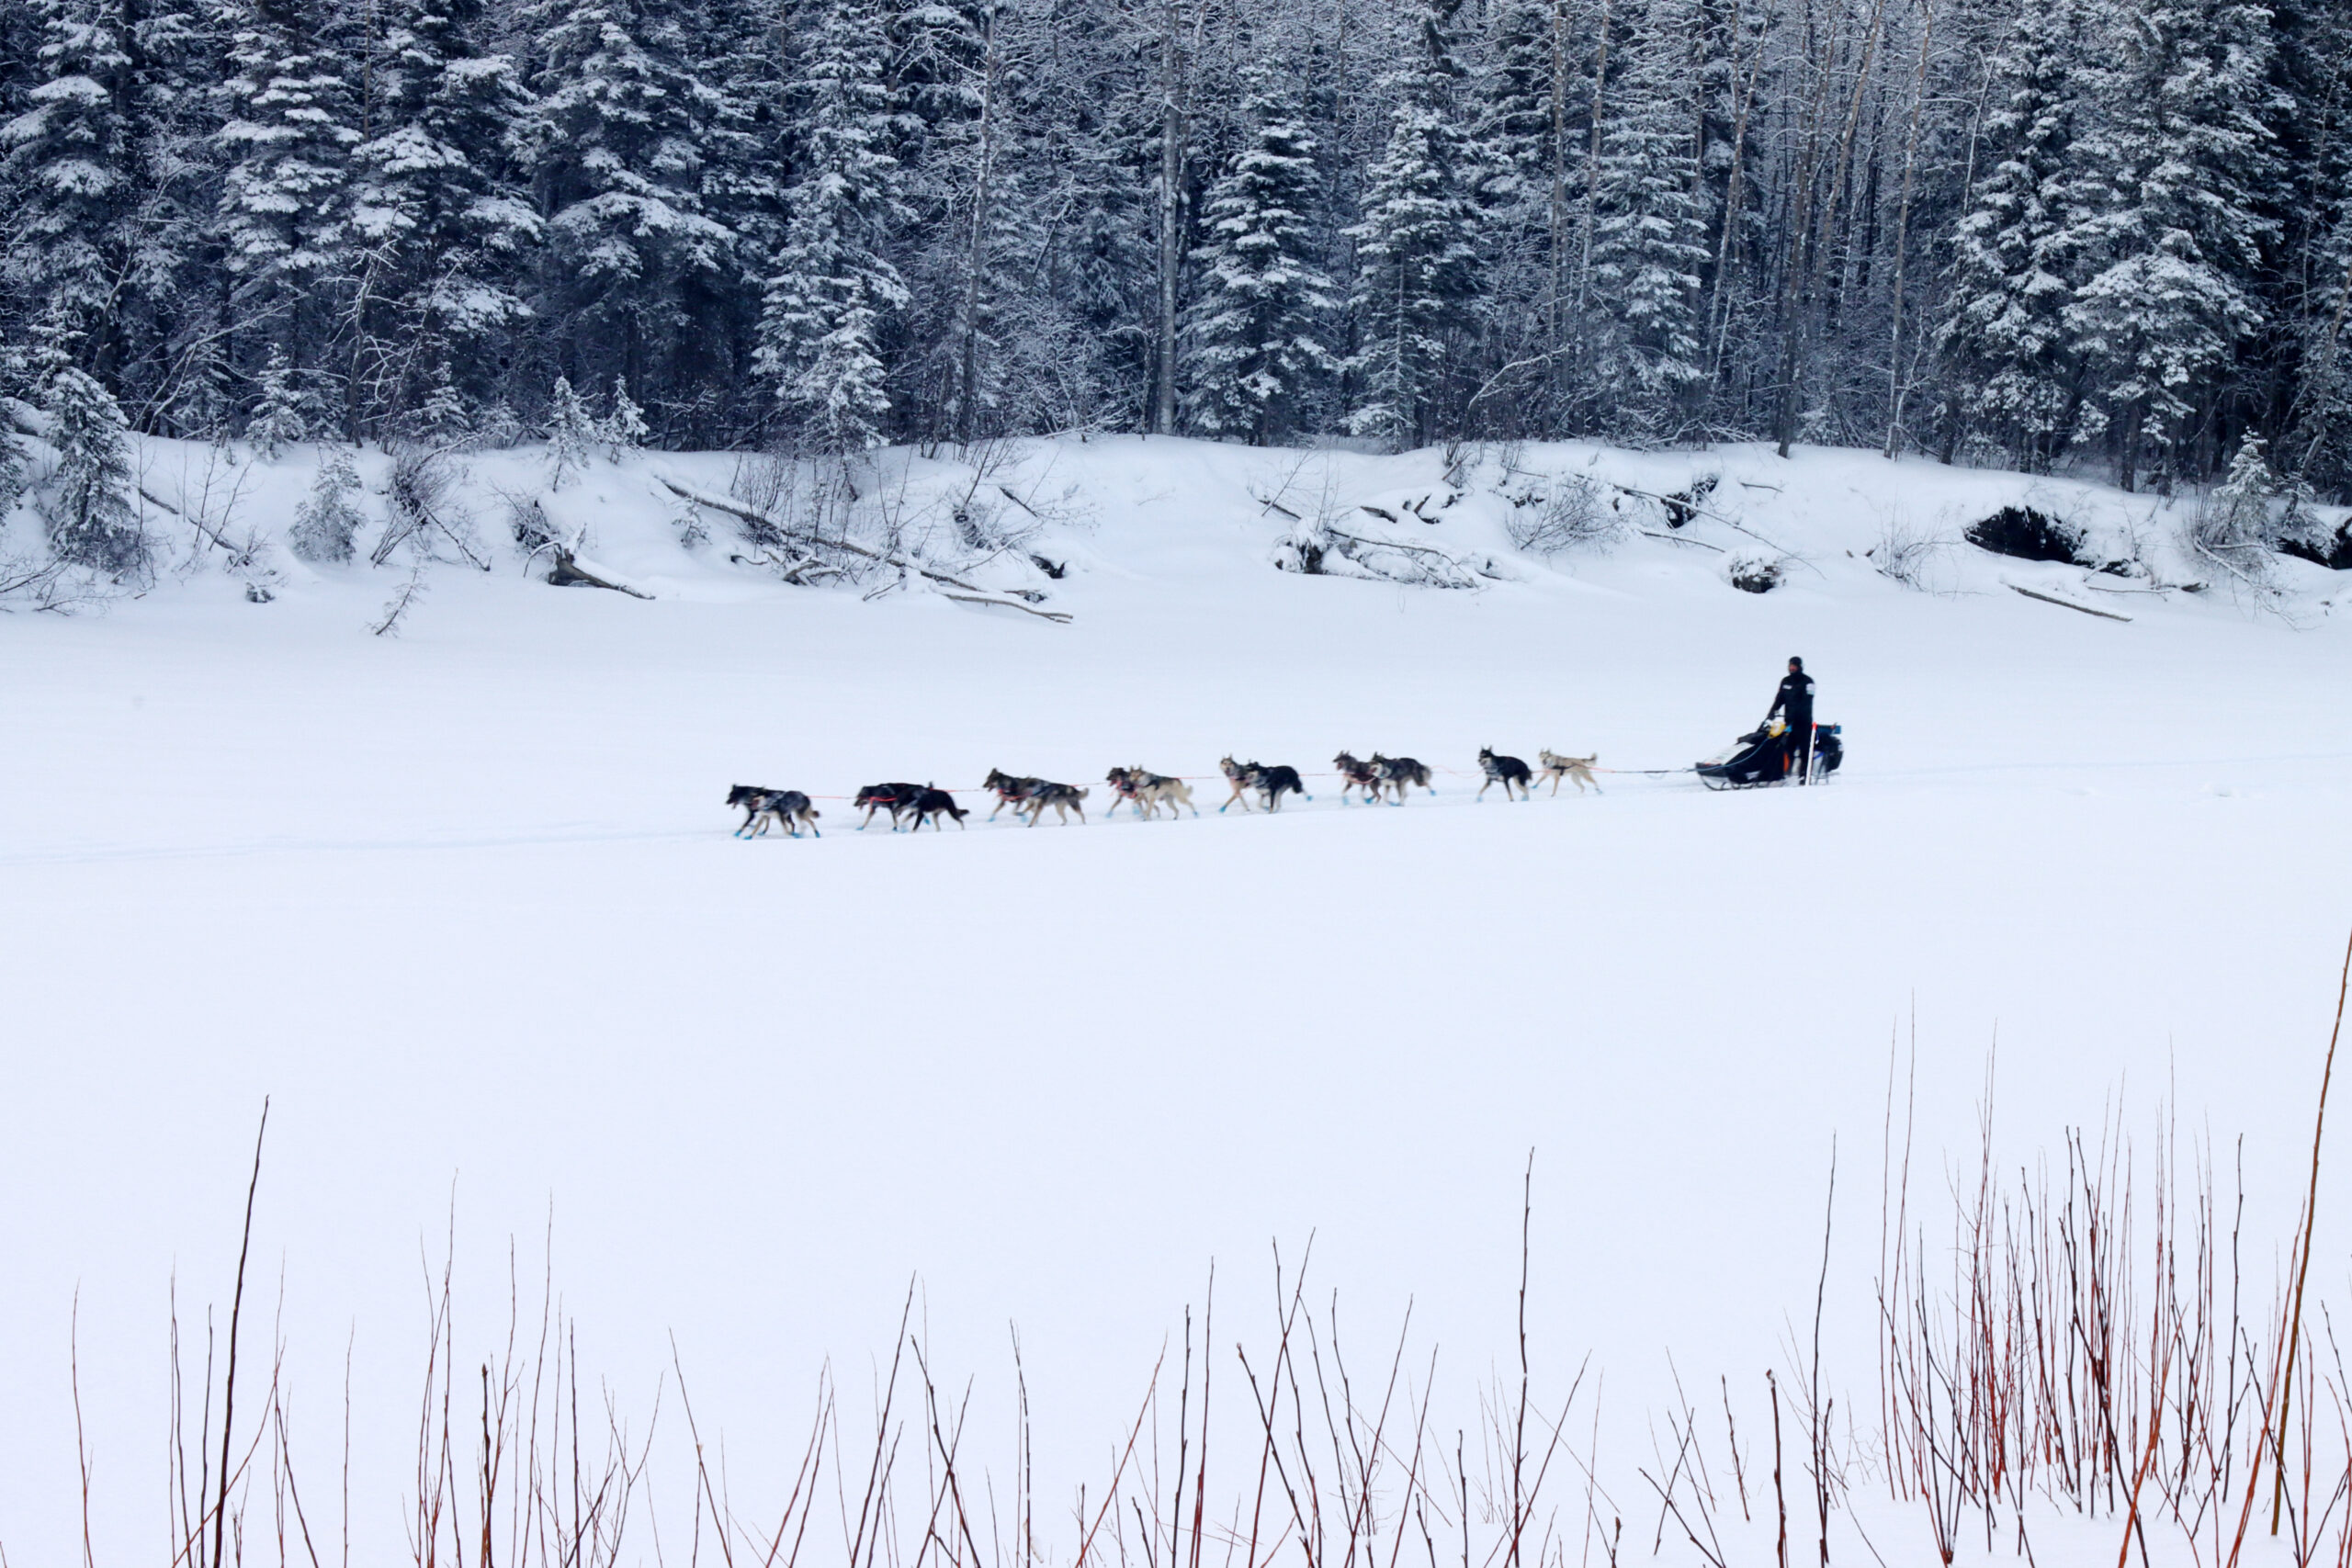 a musher and dog team in the snow